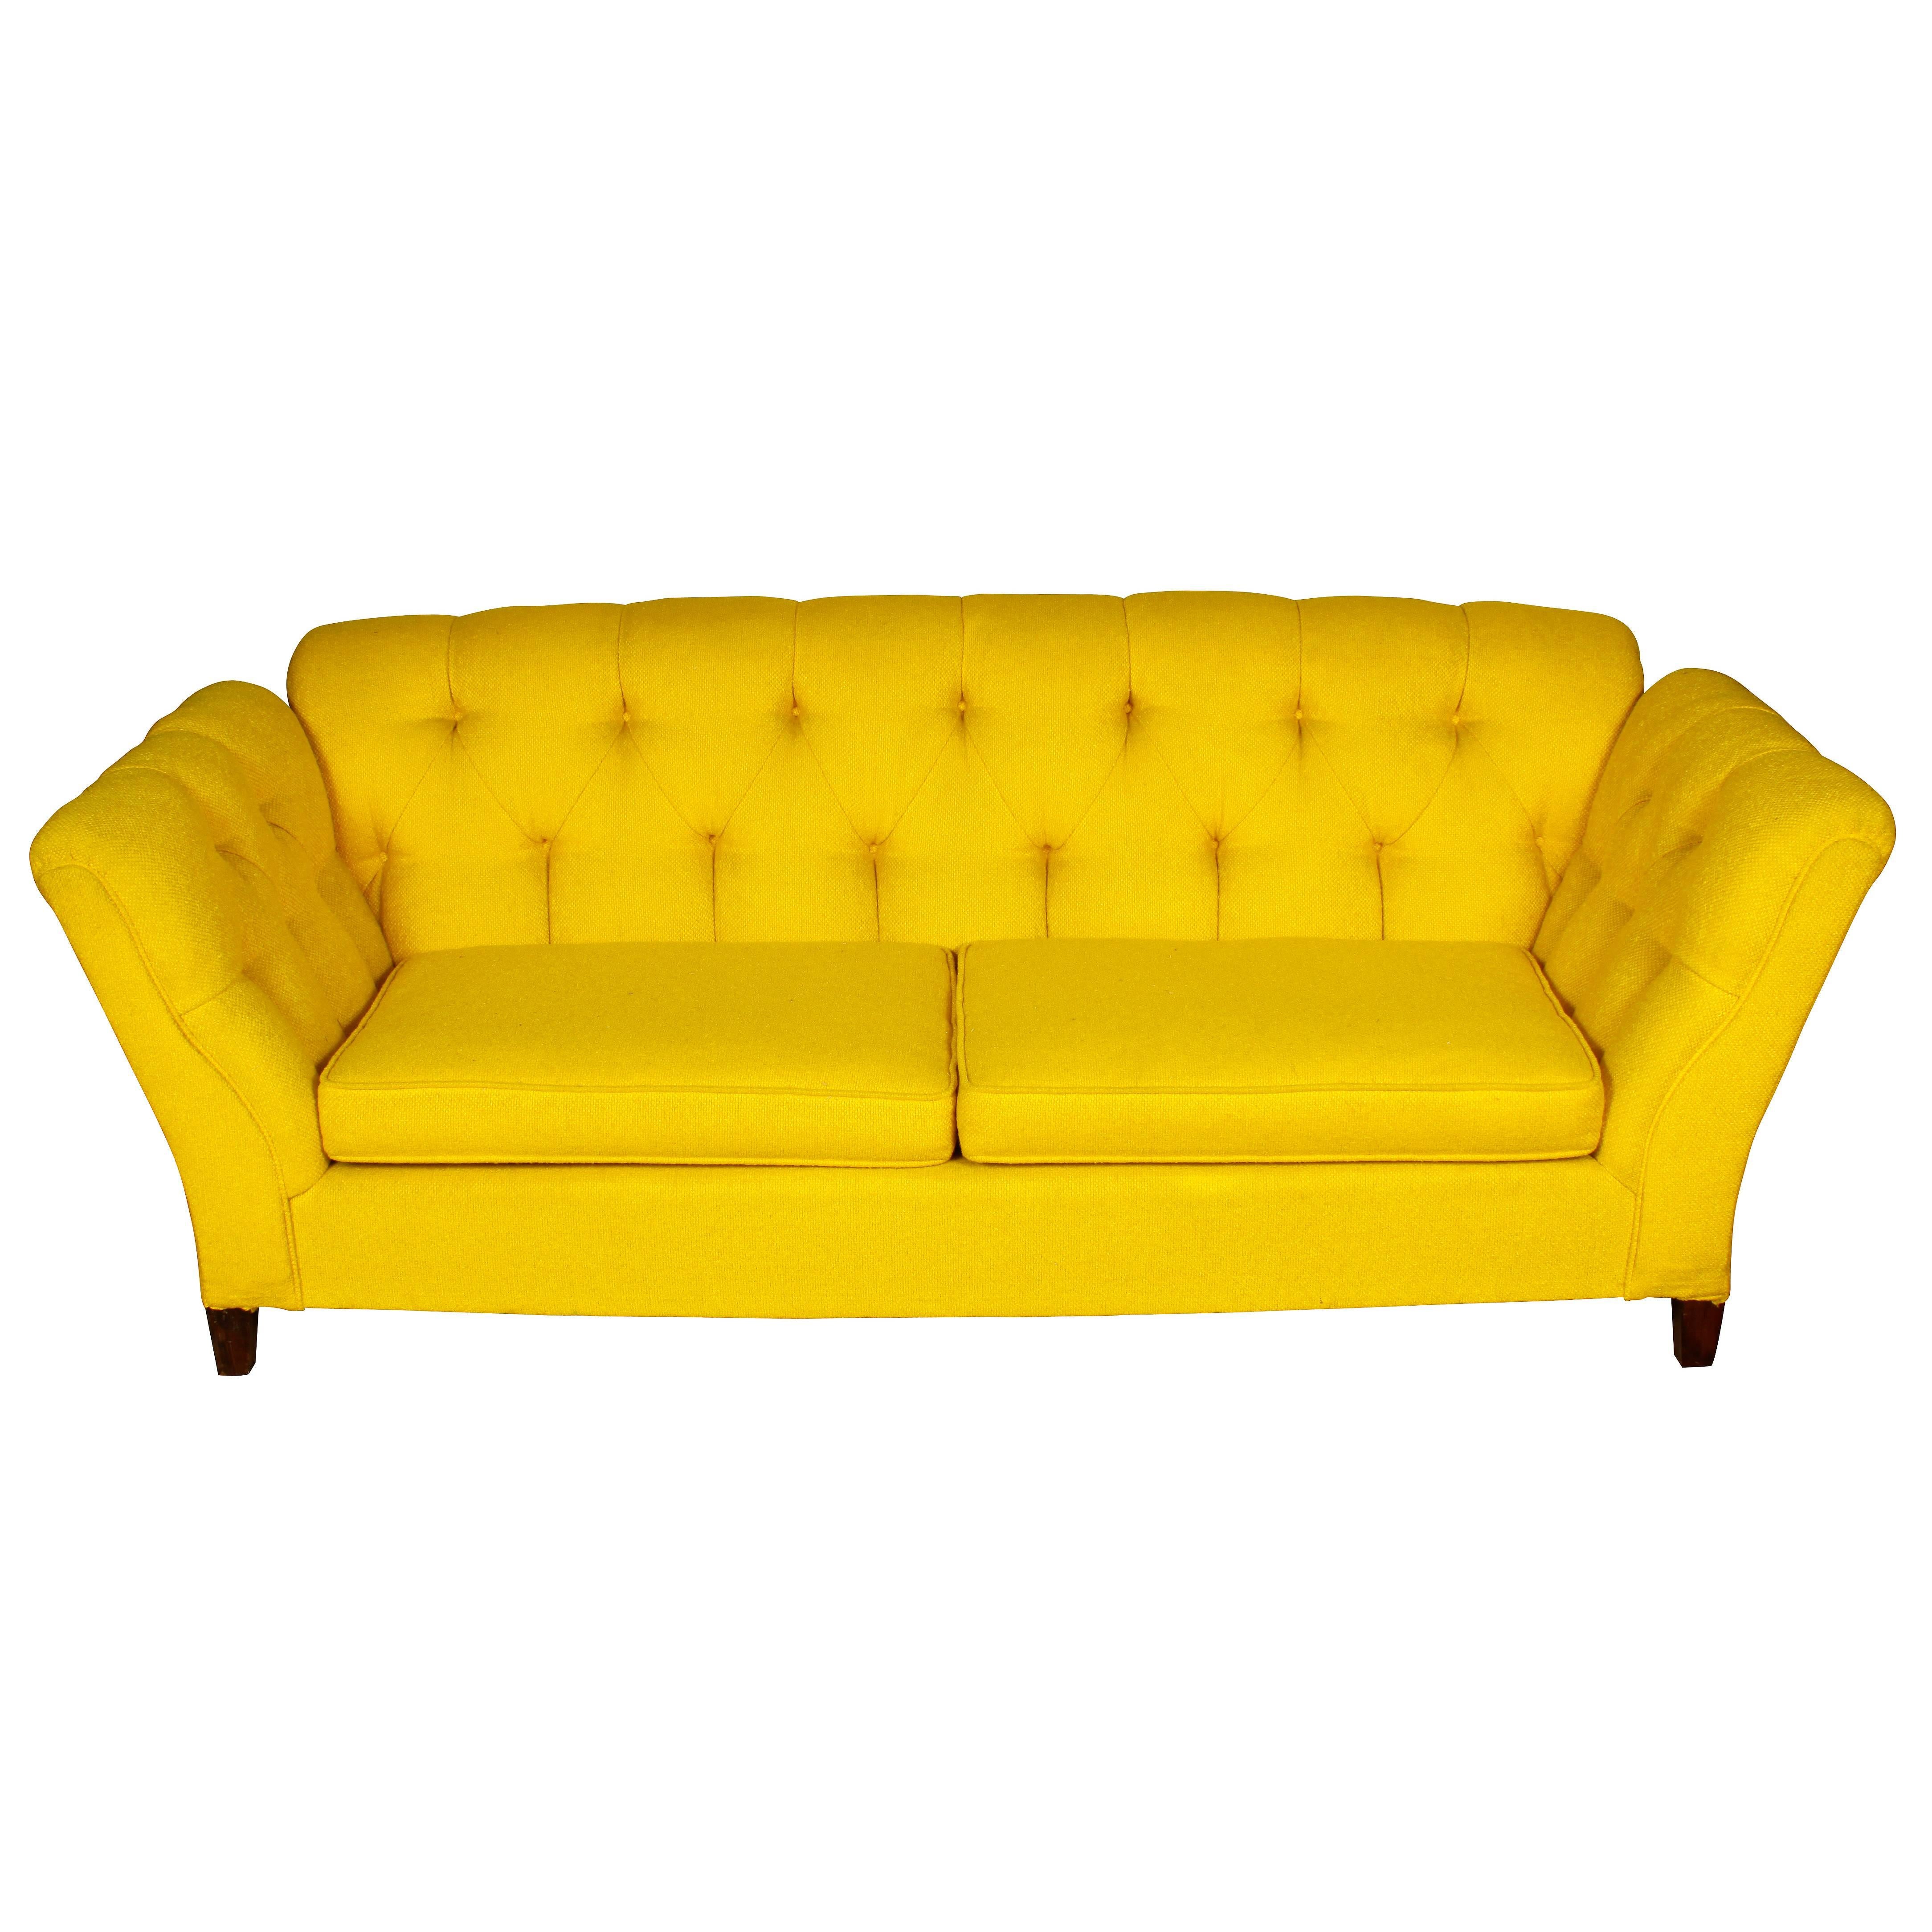 Vintage Tufted and Channelled Sofa 